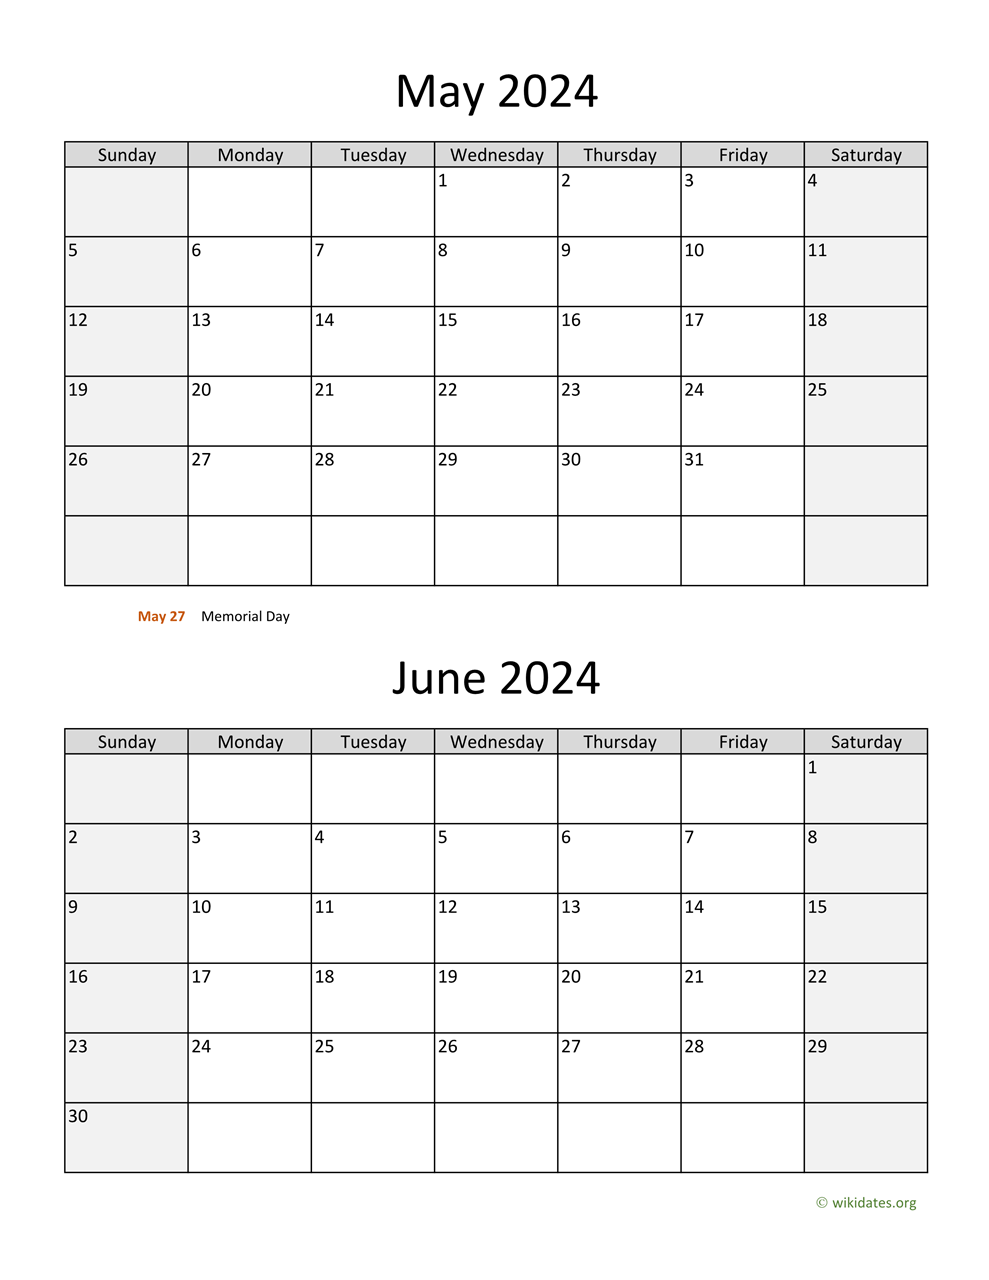 May and June 2024 Calendar | WikiDates.org